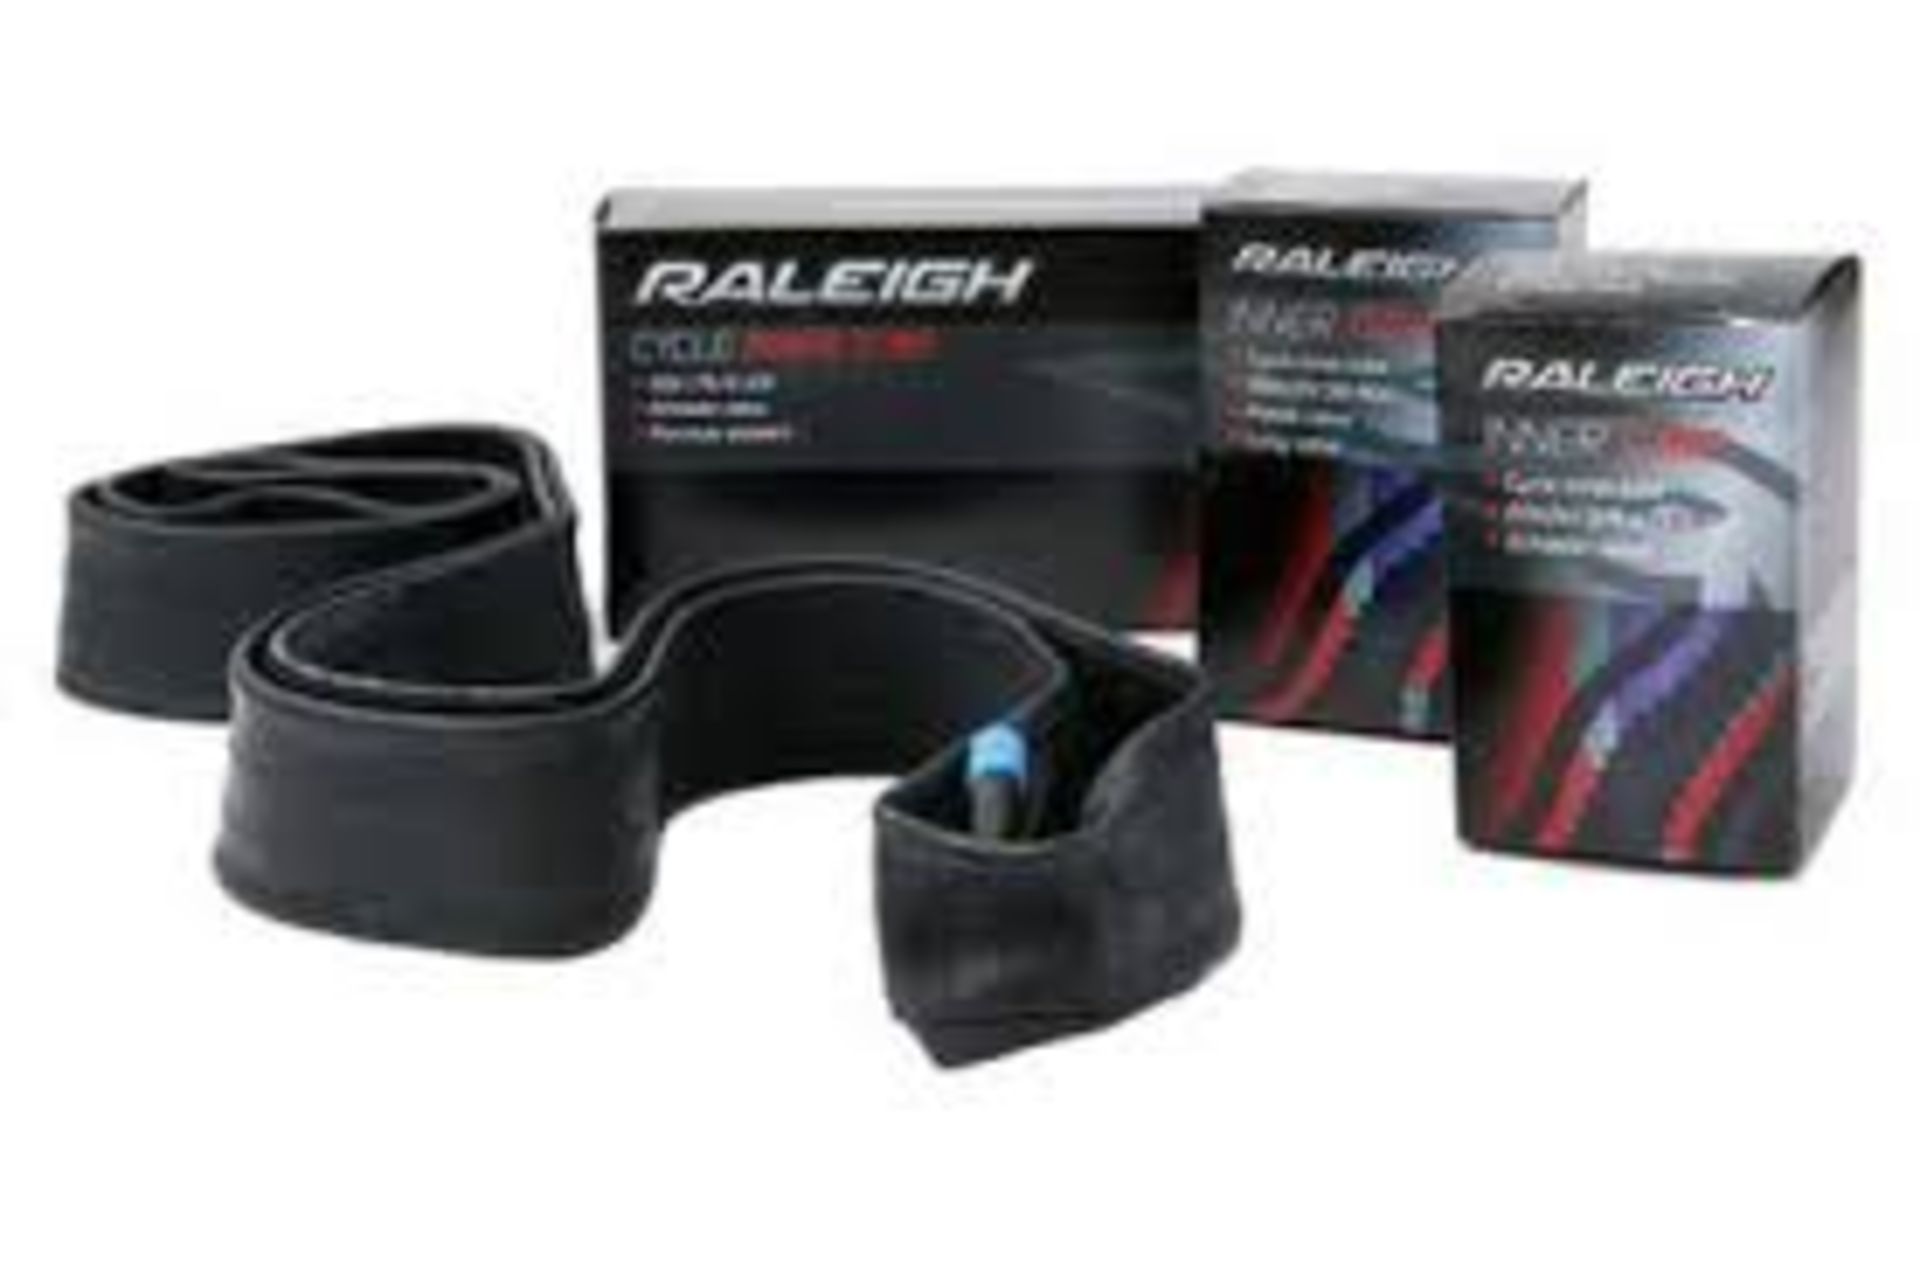 V *TRADE QTY* Brand New Two Raleigh Inner tubes 26 x 1.50-2.125 for adult mountain bike X 4 YOUR BID